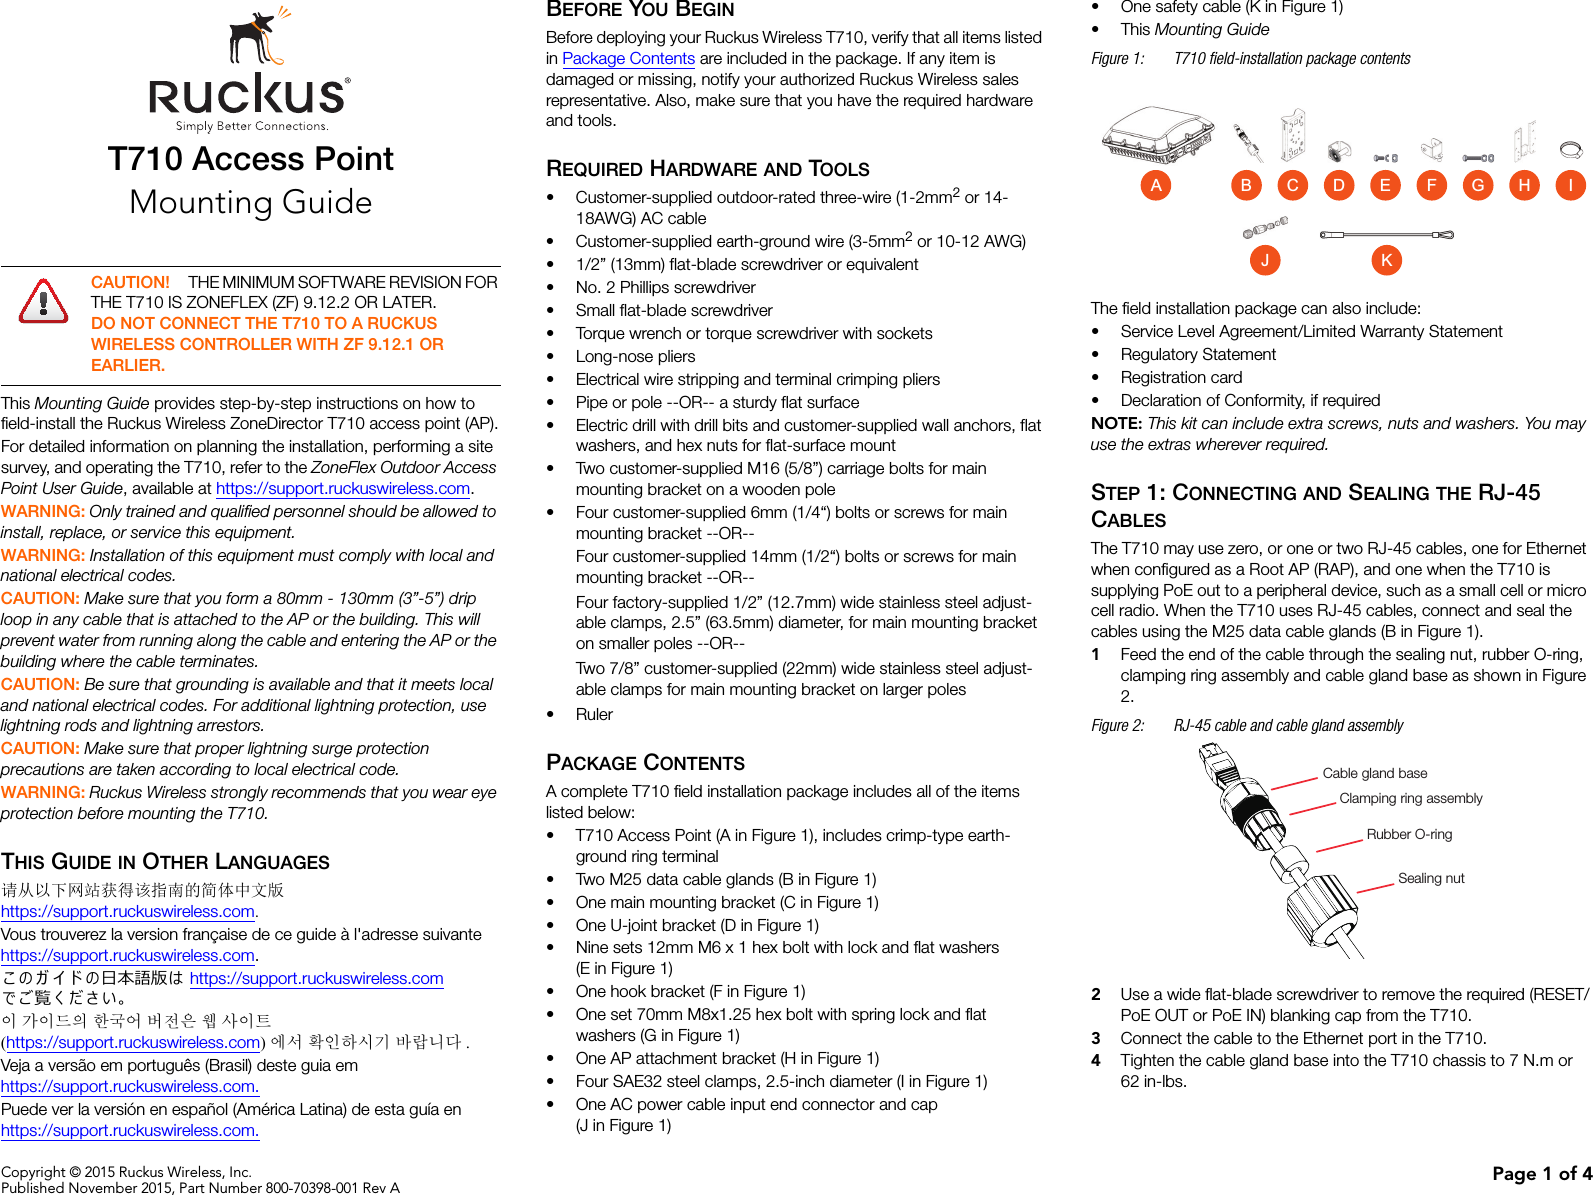 Copyright © 2015 Ruckus Wireless, Inc.Published November 2015, Part Number 800-70398-001 Rev A Page 1 of 4T710 Access PointMounting GuideThis Mounting Guide provides step-by-step instructions on how to field-install the Ruckus Wireless ZoneDirector T710 access point (AP).For detailed information on planning the installation, performing a site survey, and operating the T710, refer to the ZoneFlex Outdoor Access Point User Guide, available at https://support.ruckuswireless.com.WARNING: Only trained and qualified personnel should be allowed to install, replace, or service this equipment. WARNING: Installation of this equipment must comply with local and national electrical codes. CAUTION: Make sure that you form a 80mm - 130mm (3”-5”) drip loop in any cable that is attached to the AP or the building. This will prevent water from running along the cable and entering the AP or the building where the cable terminates. CAUTION: Be sure that grounding is available and that it meets local and national electrical codes. For additional lightning protection, use lightning rods and lightning arrestors. CAUTION: Make sure that proper lightning surge protection precautions are taken according to local electrical code. WARNING: Ruckus Wireless strongly recommends that you wear eye protection before mounting the T710.THIS GUIDE IN OTHER LANGUAGES请从以下网站获得该指南的简体中文版 https://support.ruckuswireless.com.Vous trouverez la version française de ce guide à l&apos;adresse suivante https://support.ruckuswireless.com.こ の ガ イ ド の⽇本語版は https://support.ruckuswireless.com でご覧く ださい。이 가이드의 한국어 버전은 웹 사이트(https://support.ruckuswireless.com)에서 확인하시기 바랍니다 .Veja a versão em português (Brasil) deste guia em https://support.ruckuswireless.com.Puede ver la versión en español (América Latina) de esta guía en https://support.ruckuswireless.com.BEFORE YOU BEGINBefore deploying your Ruckus Wireless T710, verify that all items listed in Package Contents are included in the package. If any item is damaged or missing, notify your authorized Ruckus Wireless sales representative. Also, make sure that you have the required hardware and tools. REQUIRED HARDWARE AND TOOLS• Customer-supplied outdoor-rated three-wire (1-2mm2 or 14-18AWG) AC cable• Customer-supplied earth-ground wire (3-5mm2 or 10-12 AWG)• 1/2” (13mm) flat-blade screwdriver or equivalent• No. 2 Phillips screwdriver• Small flat-blade screwdriver• Torque wrench or torque screwdriver with sockets• Long-nose pliers• Electrical wire stripping and terminal crimping pliers• Pipe or pole --OR-- a sturdy flat surface• Electric drill with drill bits and customer-supplied wall anchors, flat washers, and hex nuts for flat-surface mount• Two customer-supplied M16 (5/8”) carriage bolts for main mounting bracket on a wooden pole• Four customer-supplied 6mm (1/4“) bolts or screws for main mounting bracket --OR-- Four customer-supplied 14mm (1/2“) bolts or screws for main mounting bracket --OR-- Four factory-supplied 1/2” (12.7mm) wide stainless steel adjust-able clamps, 2.5” (63.5mm) diameter, for main mounting bracket on smaller poles --OR-- Two 7/8” customer-supplied (22mm) wide stainless steel adjust-able clamps for main mounting bracket on larger poles•RulerPACKAGE CONTENTSA complete T710 field installation package includes all of the items listed below:• T710 Access Point (A in Figure 1), includes crimp-type earth-ground ring terminal• Two M25 data cable glands (B in Figure 1)• One main mounting bracket (C in Figure 1)• One U-joint bracket (D in Figure 1)• Nine sets 12mm M6 x 1 hex bolt with lock and flat washers (E in Figure 1)• One hook bracket (F in Figure 1)• One set 70mm M8x1.25 hex bolt with spring lock and flat washers (G in Figure 1)• One AP attachment bracket (H in Figure 1)• Four SAE32 steel clamps, 2.5-inch diameter (I in Figure 1)• One AC power cable input end connector and cap (J in Figure 1)• One safety cable (K in Figure 1)•This Mounting Guide Figure 1: T710 field-installation package contentsThe field installation package can also include: • Service Level Agreement/Limited Warranty Statement• Regulatory Statement• Registration card• Declaration of Conformity, if requiredNOTE: This kit can include extra screws, nuts and washers. You may use the extras wherever required.STEP 1: CONNECTING AND SEALING THE RJ-45 CABLESThe T710 may use zero, or one or two RJ-45 cables, one for Ethernet when configured as a Root AP (RAP), and one when the T710 is supplying PoE out to a peripheral device, such as a small cell or micro cell radio. When the T710 uses RJ-45 cables, connect and seal the cables using the M25 data cable glands (B in Figure 1).1Feed the end of the cable through the sealing nut, rubber O-ring, clamping ring assembly and cable gland base as shown in Figure 2.Figure 2: RJ-45 cable and cable gland assembly2Use a wide flat-blade screwdriver to remove the required (RESET/PoE OUT or PoE IN) blanking cap from the T710.3Connect the cable to the Ethernet port in the T710. 4Tighten the cable gland base into the T710 chassis to 7 N.m or 62 in-lbs.CAUTION! THE MINIMUM SOFTWARE REVISION FOR THE T710 IS ZONEFLEX (ZF) 9.12.2 OR LATER. DO NOT CONNECT THE T710 TO A RUCKUS WIRELESS CONTROLLER WITH ZF 9.12.1 OR EARLIER.F G HEACB DIJ KCable gland baseClamping ring assemblyRubber O-ringSealing nut